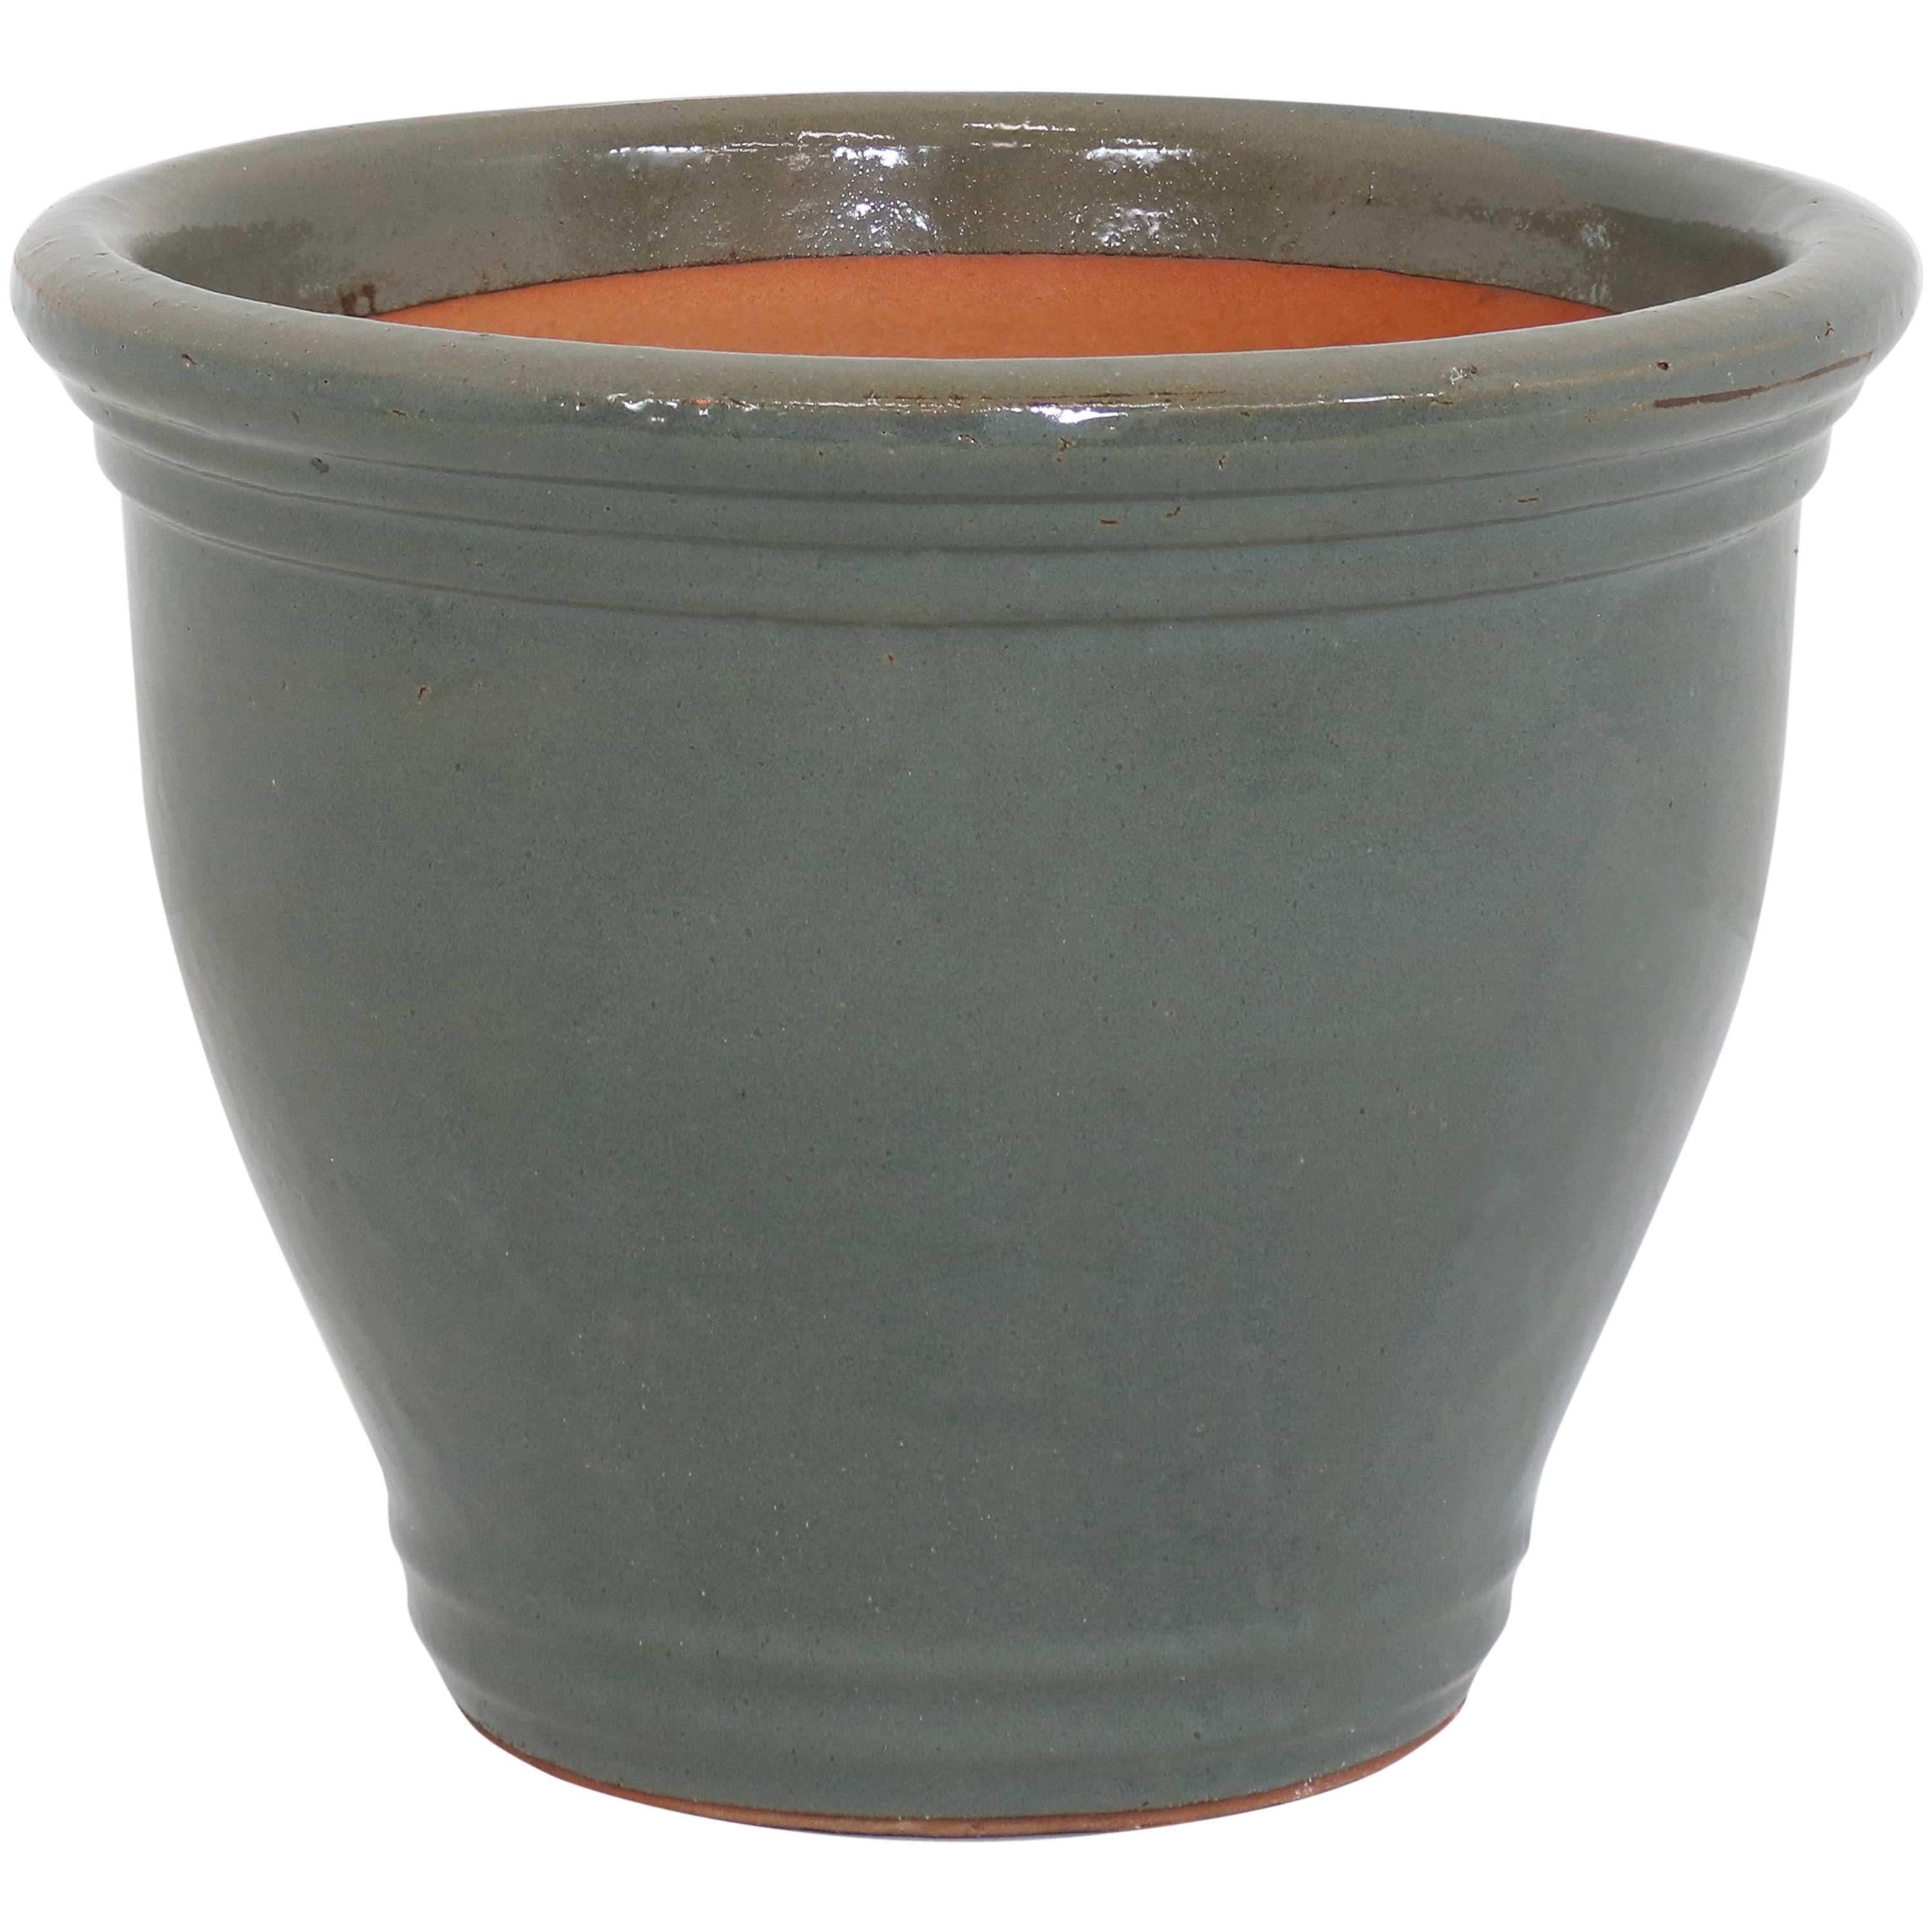 What Causes Pinholes In Pottery Glaze And How To Prevent Them